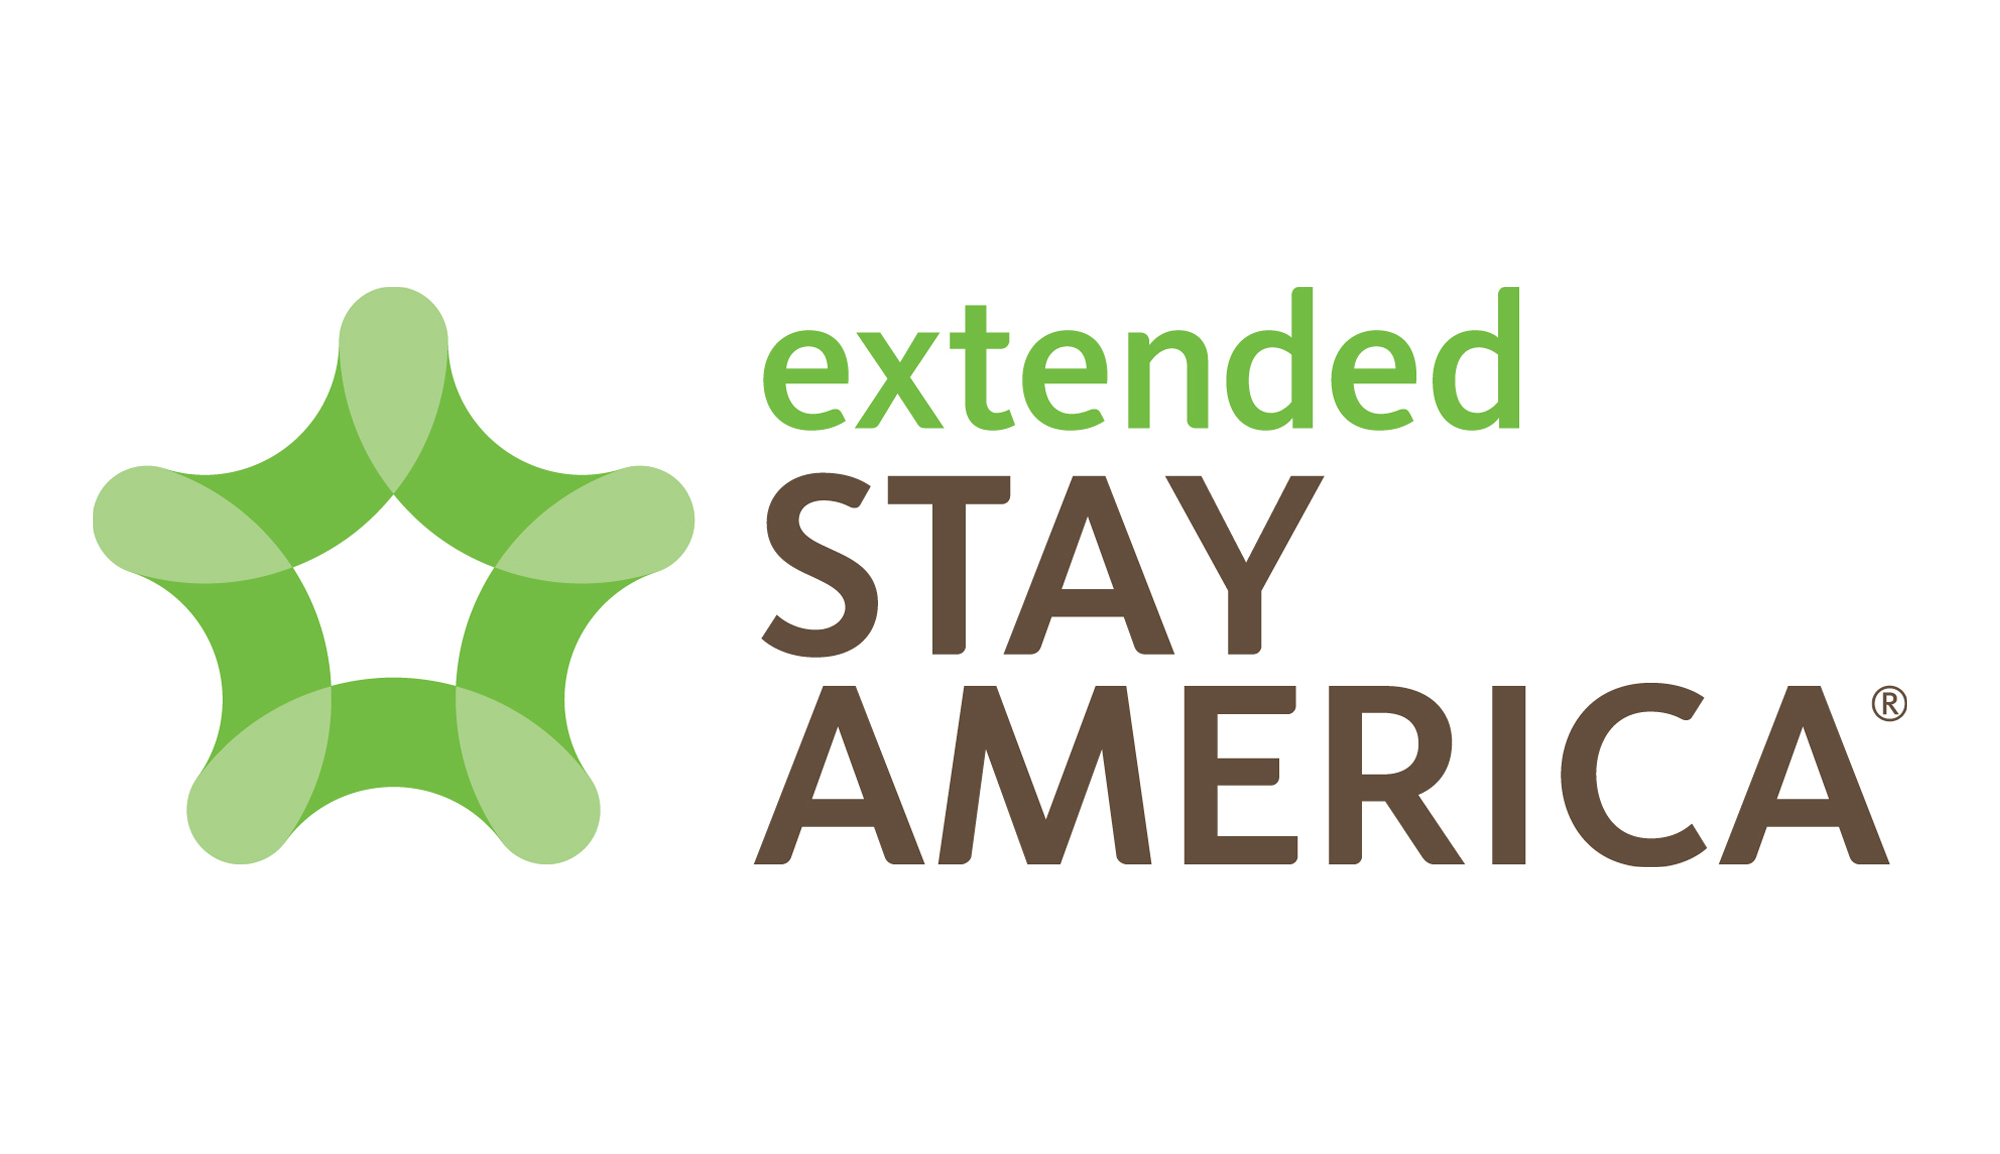 Extended Stay America hotel logo